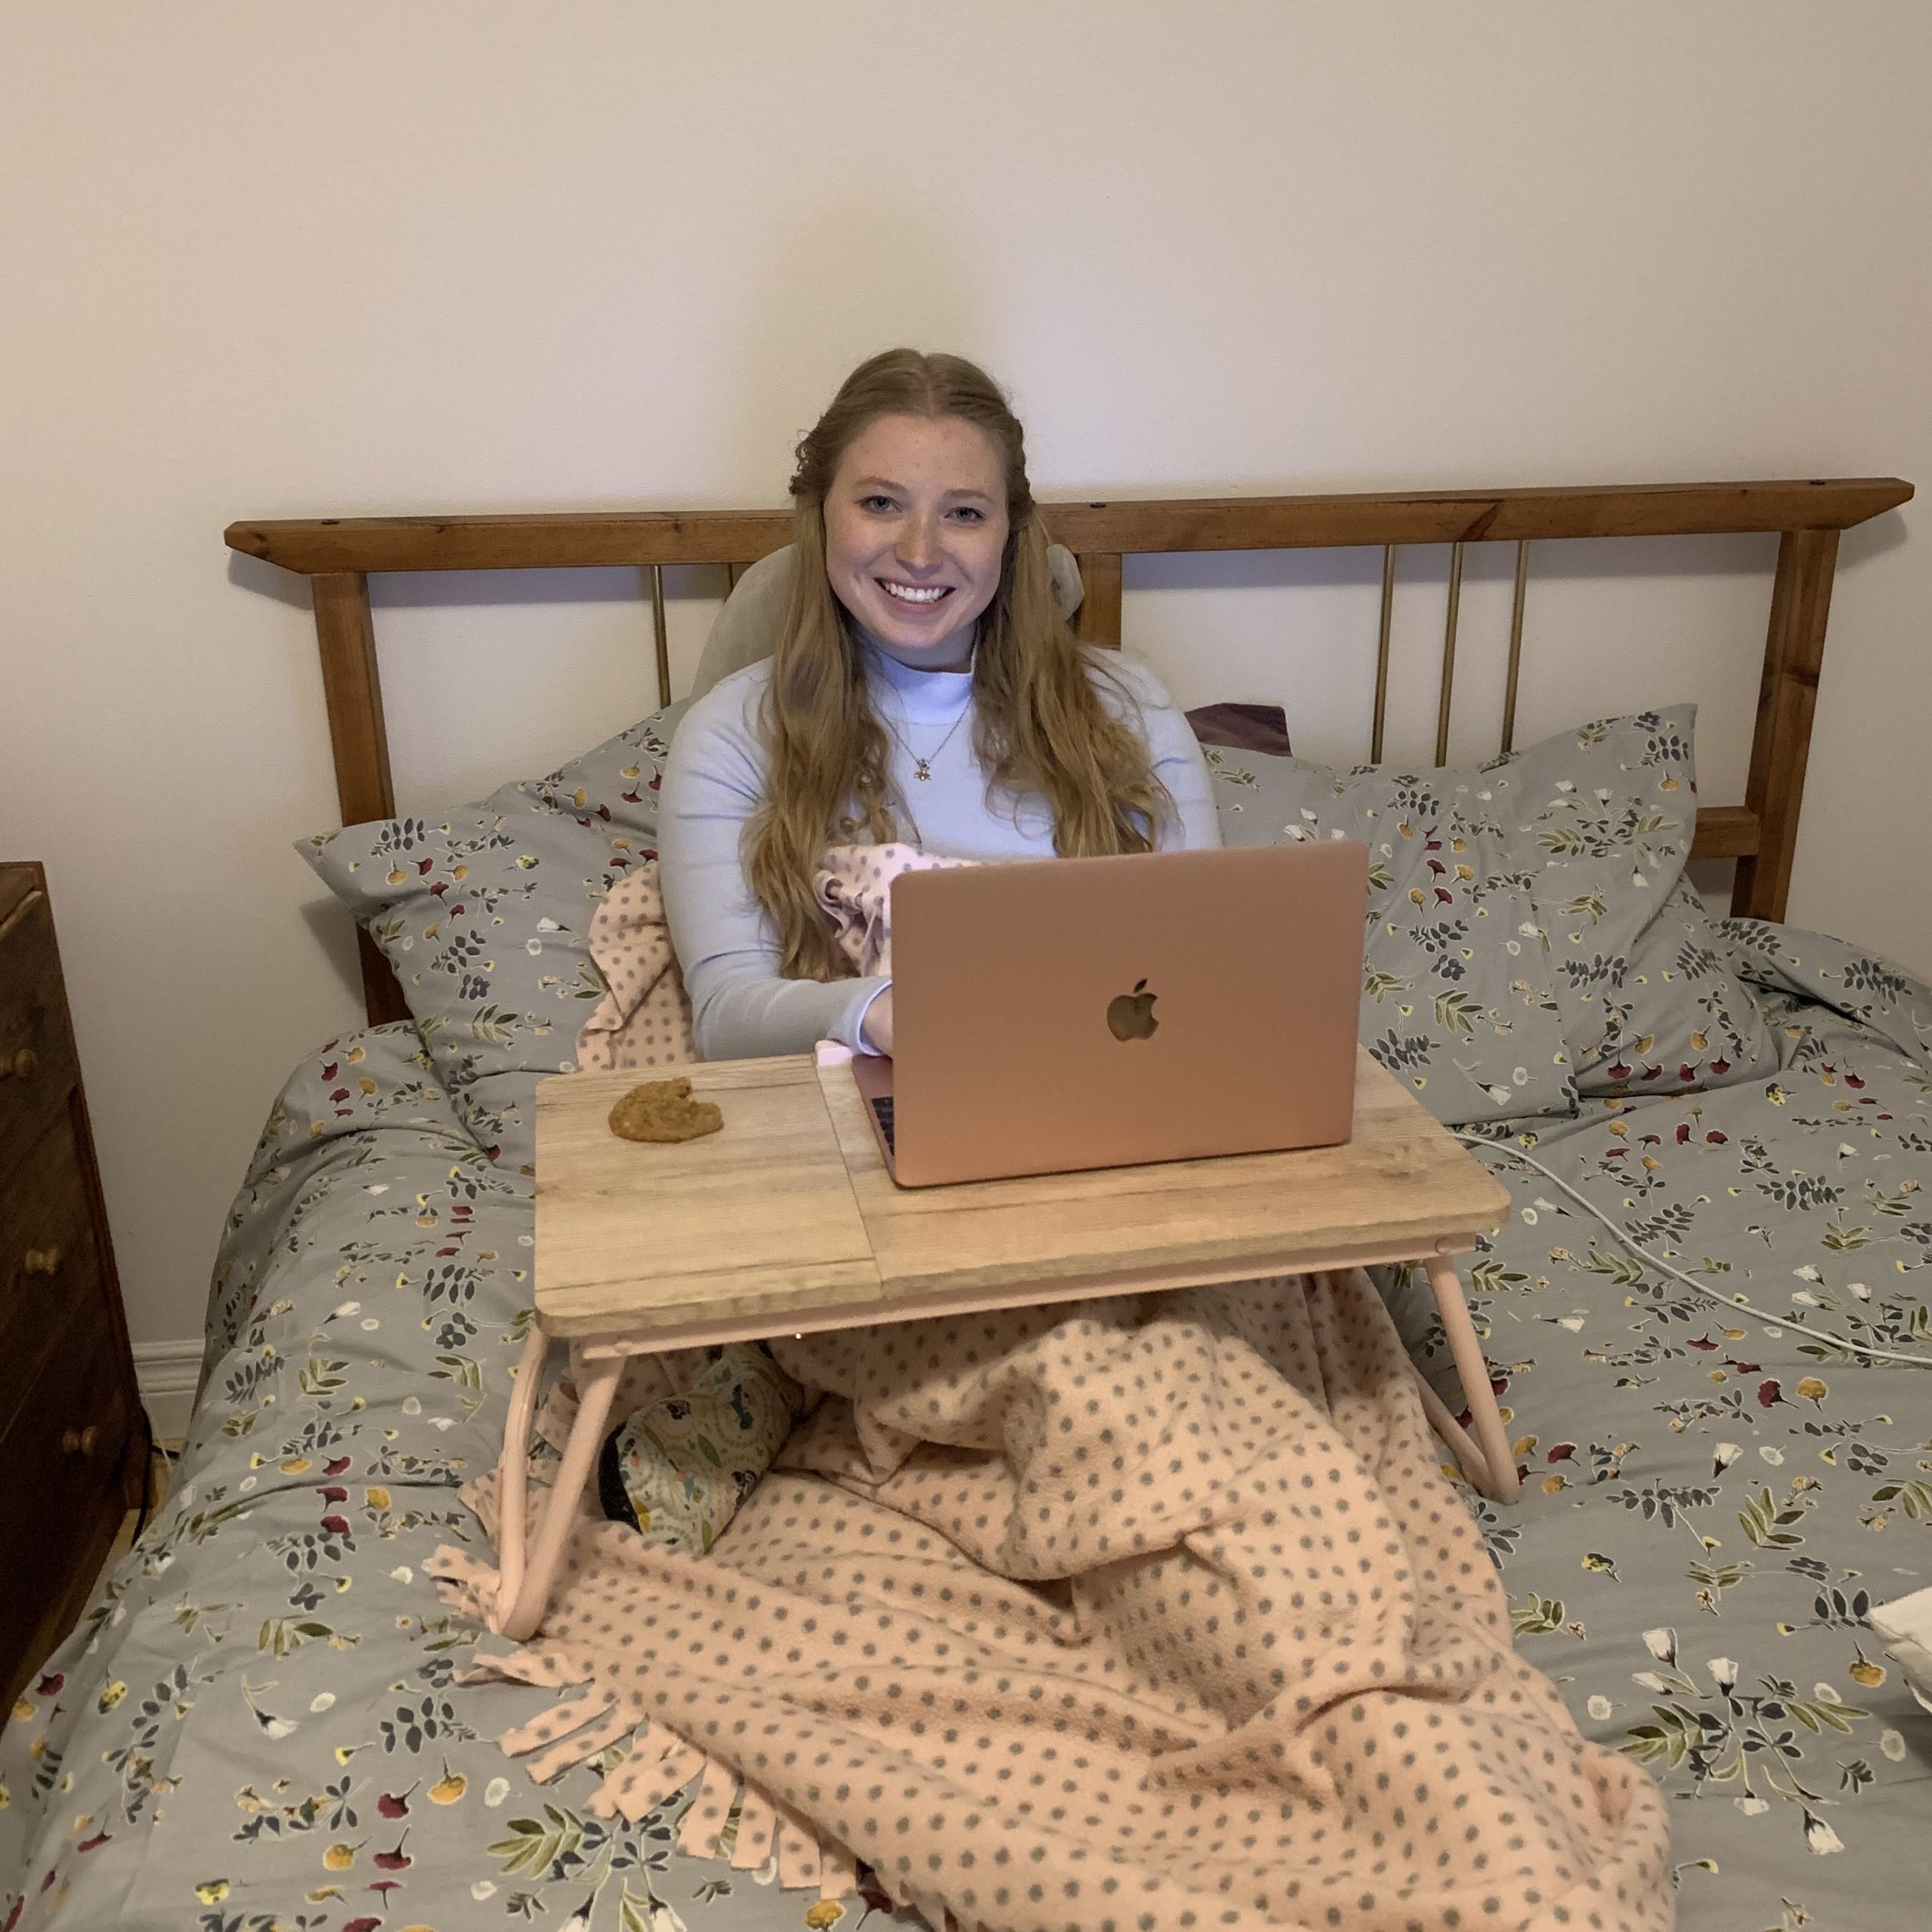 Kelcie sitting up on her bed. She looks comfortable and wrapped in blankets. There is a bed tray propped in front of her with her laptop on it. The laptop is open and you can see the light from the screen hitting her face. She is smiling and looking directly at the camera.